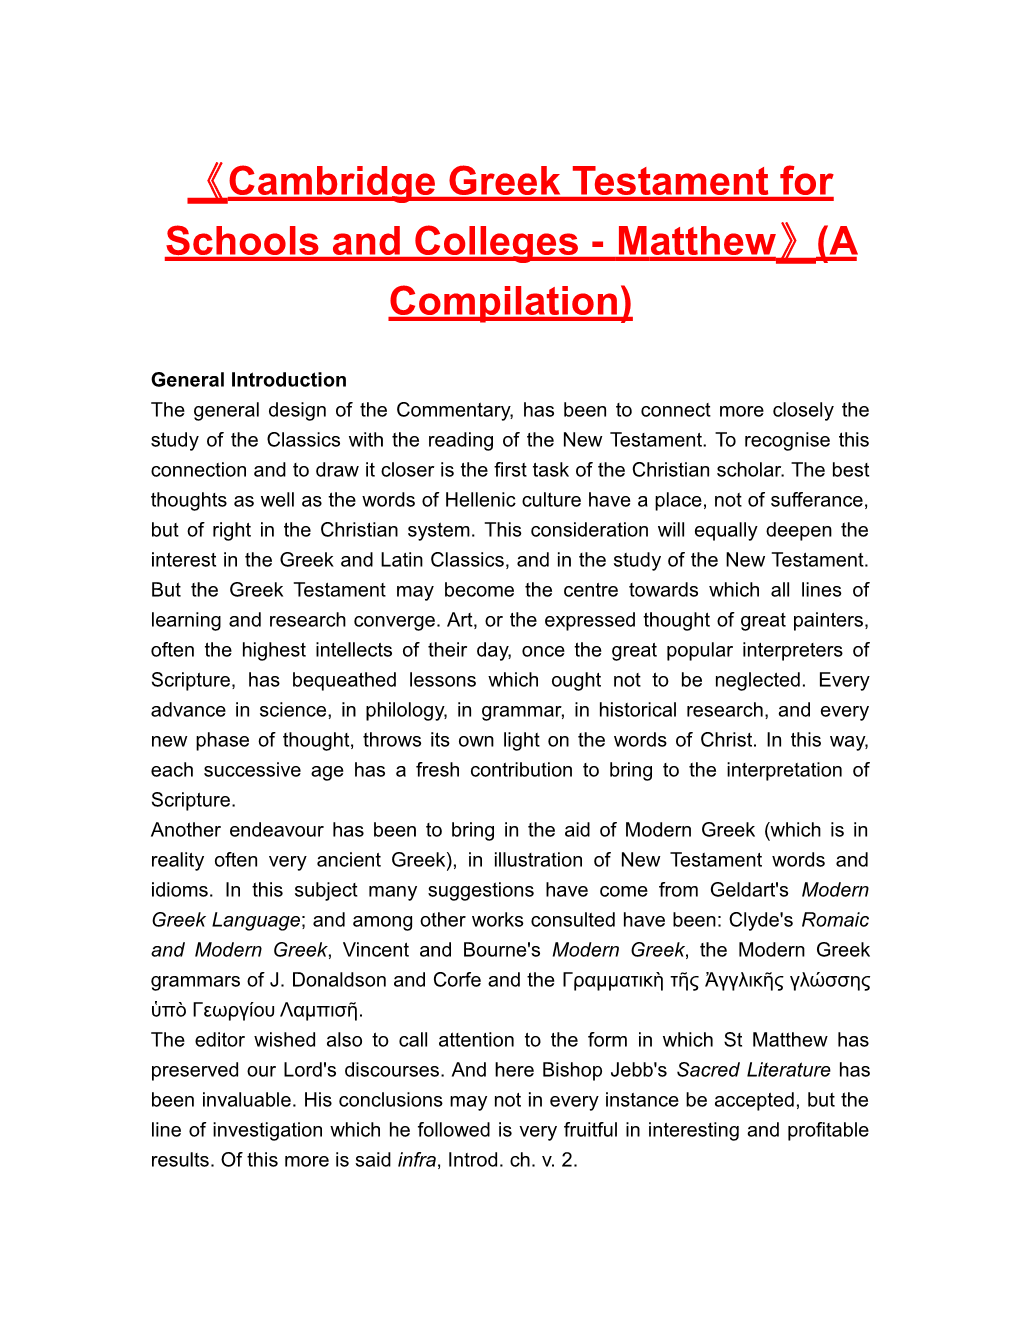 Cambridge Greek Testament for Schools and Colleges - Matthew (A Compilation)